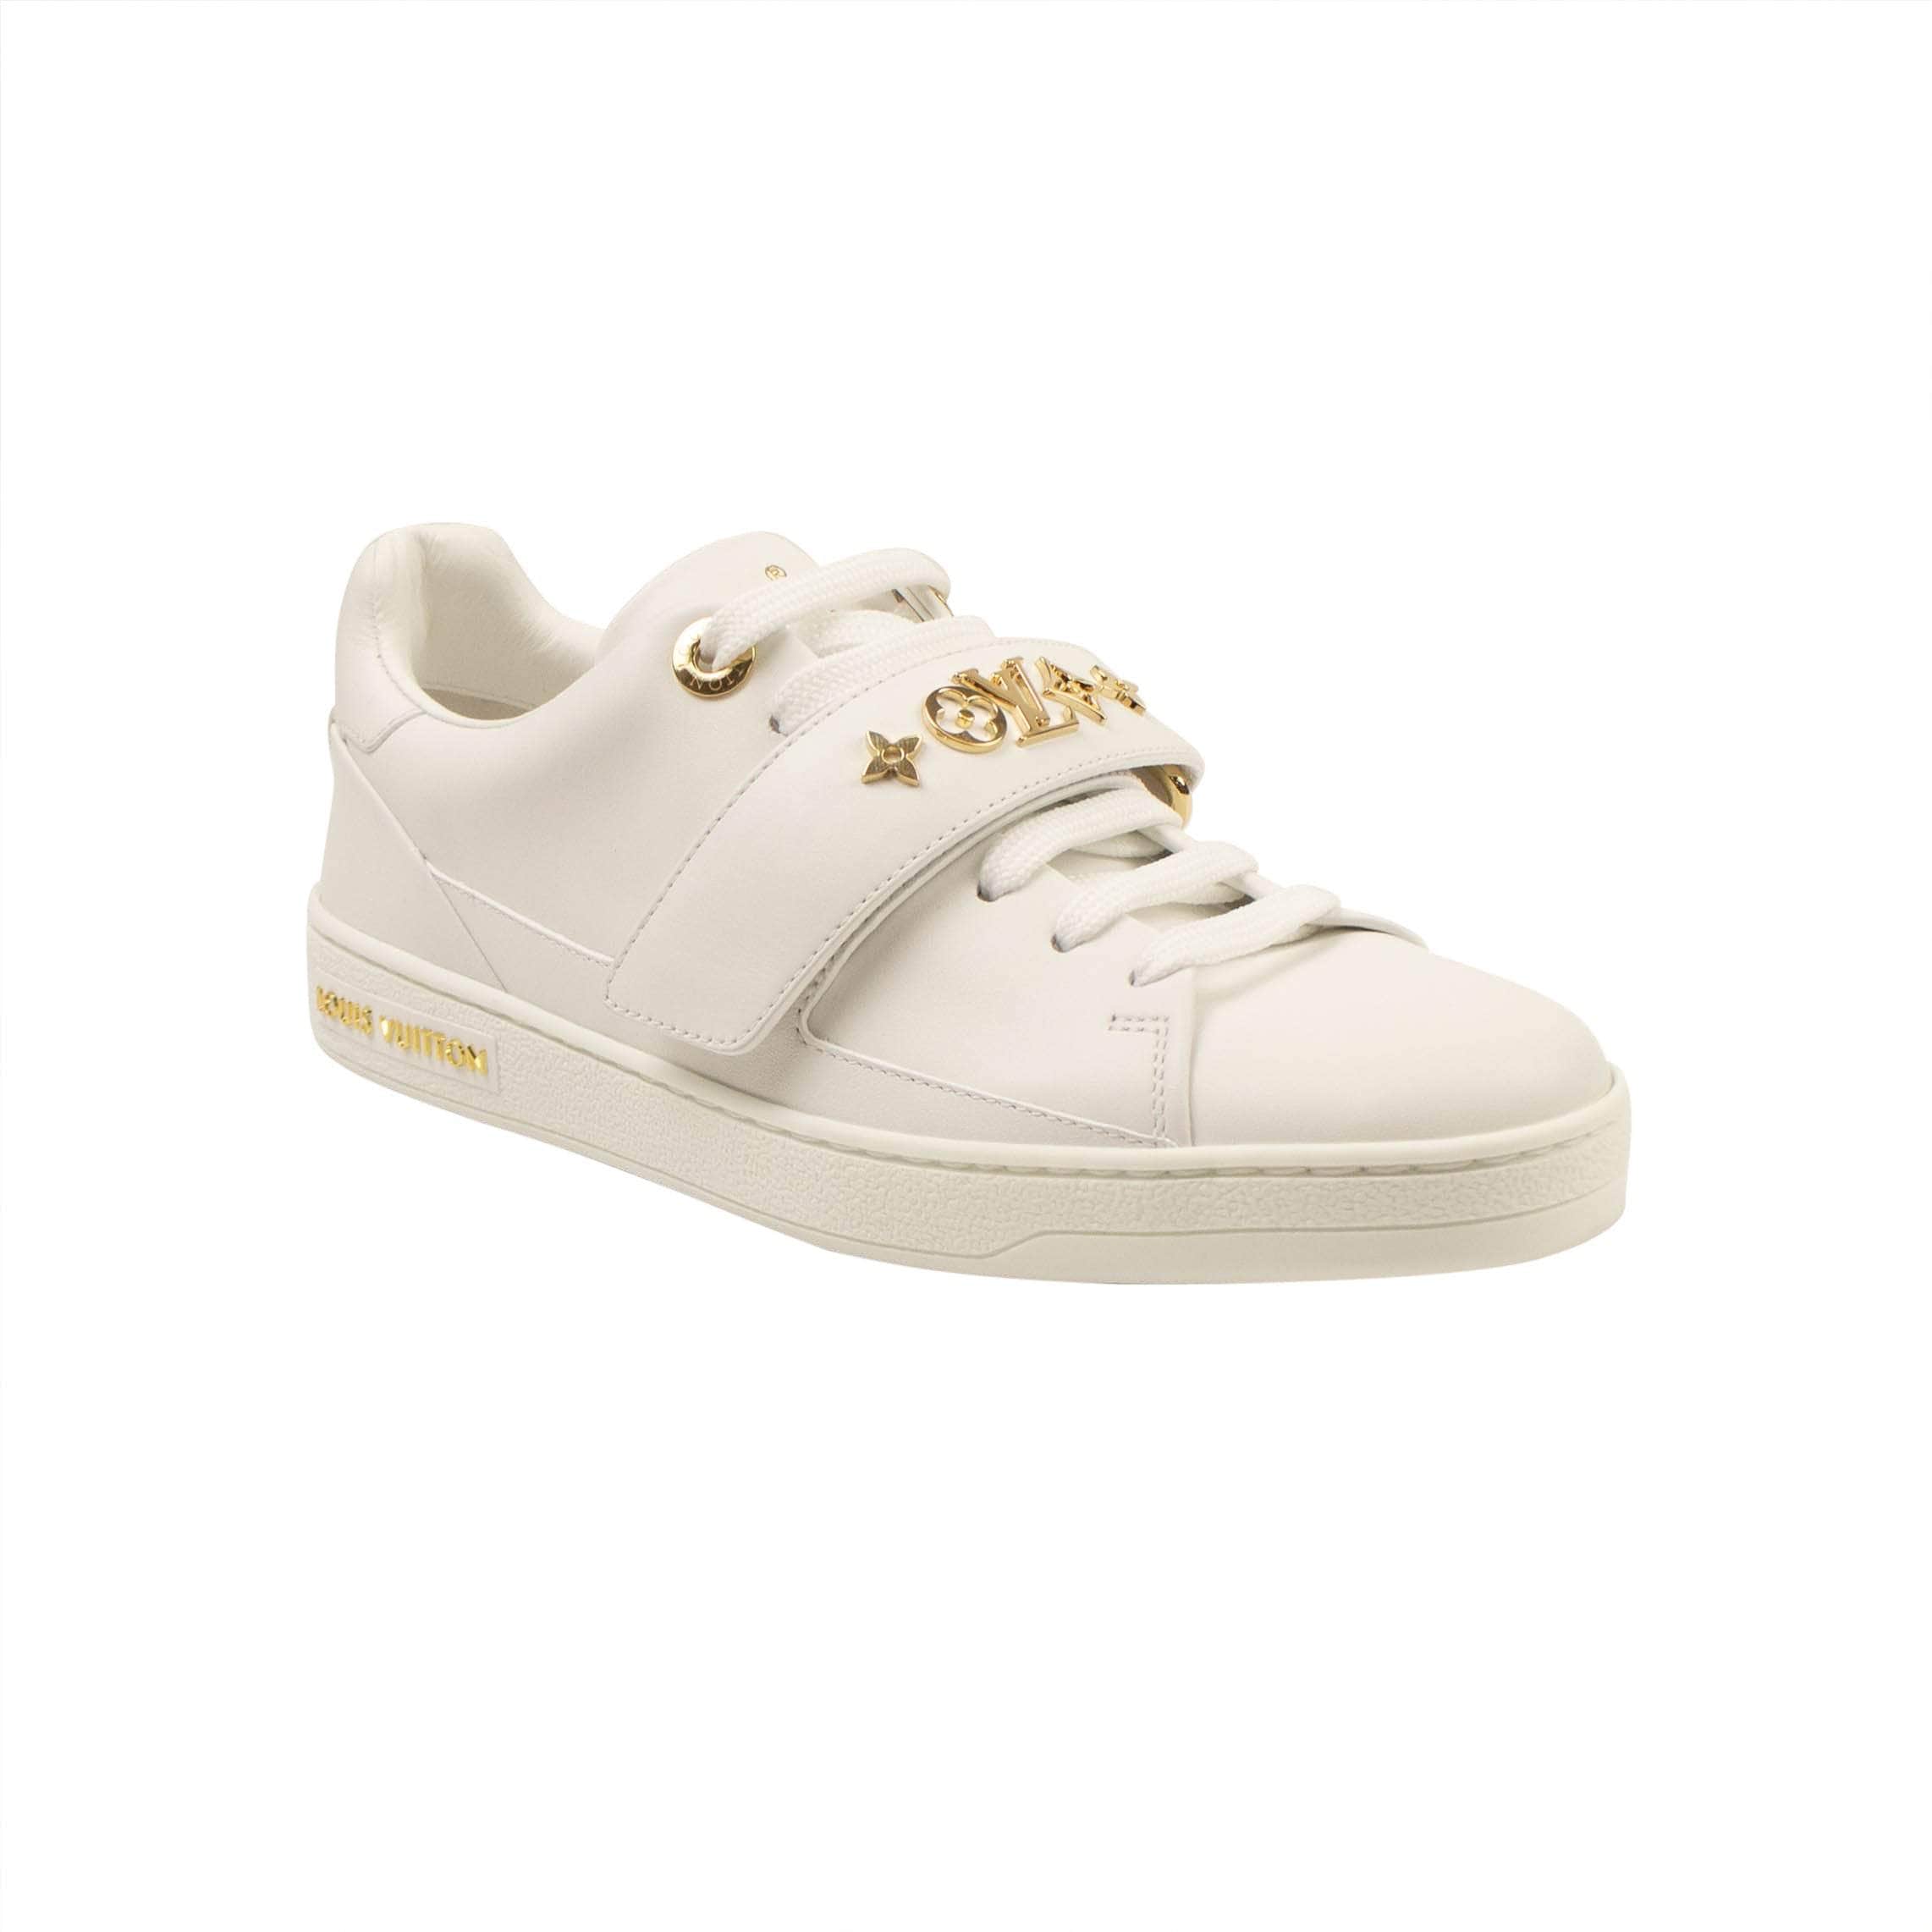 Louis Vuitton 750-1000, channelenable-all, chicmi, couponcollection, gender-womens, main-shoes, size-4-us-34-eu, SPO White Leather Lace-Up Frontrow Low-Top Sneakers